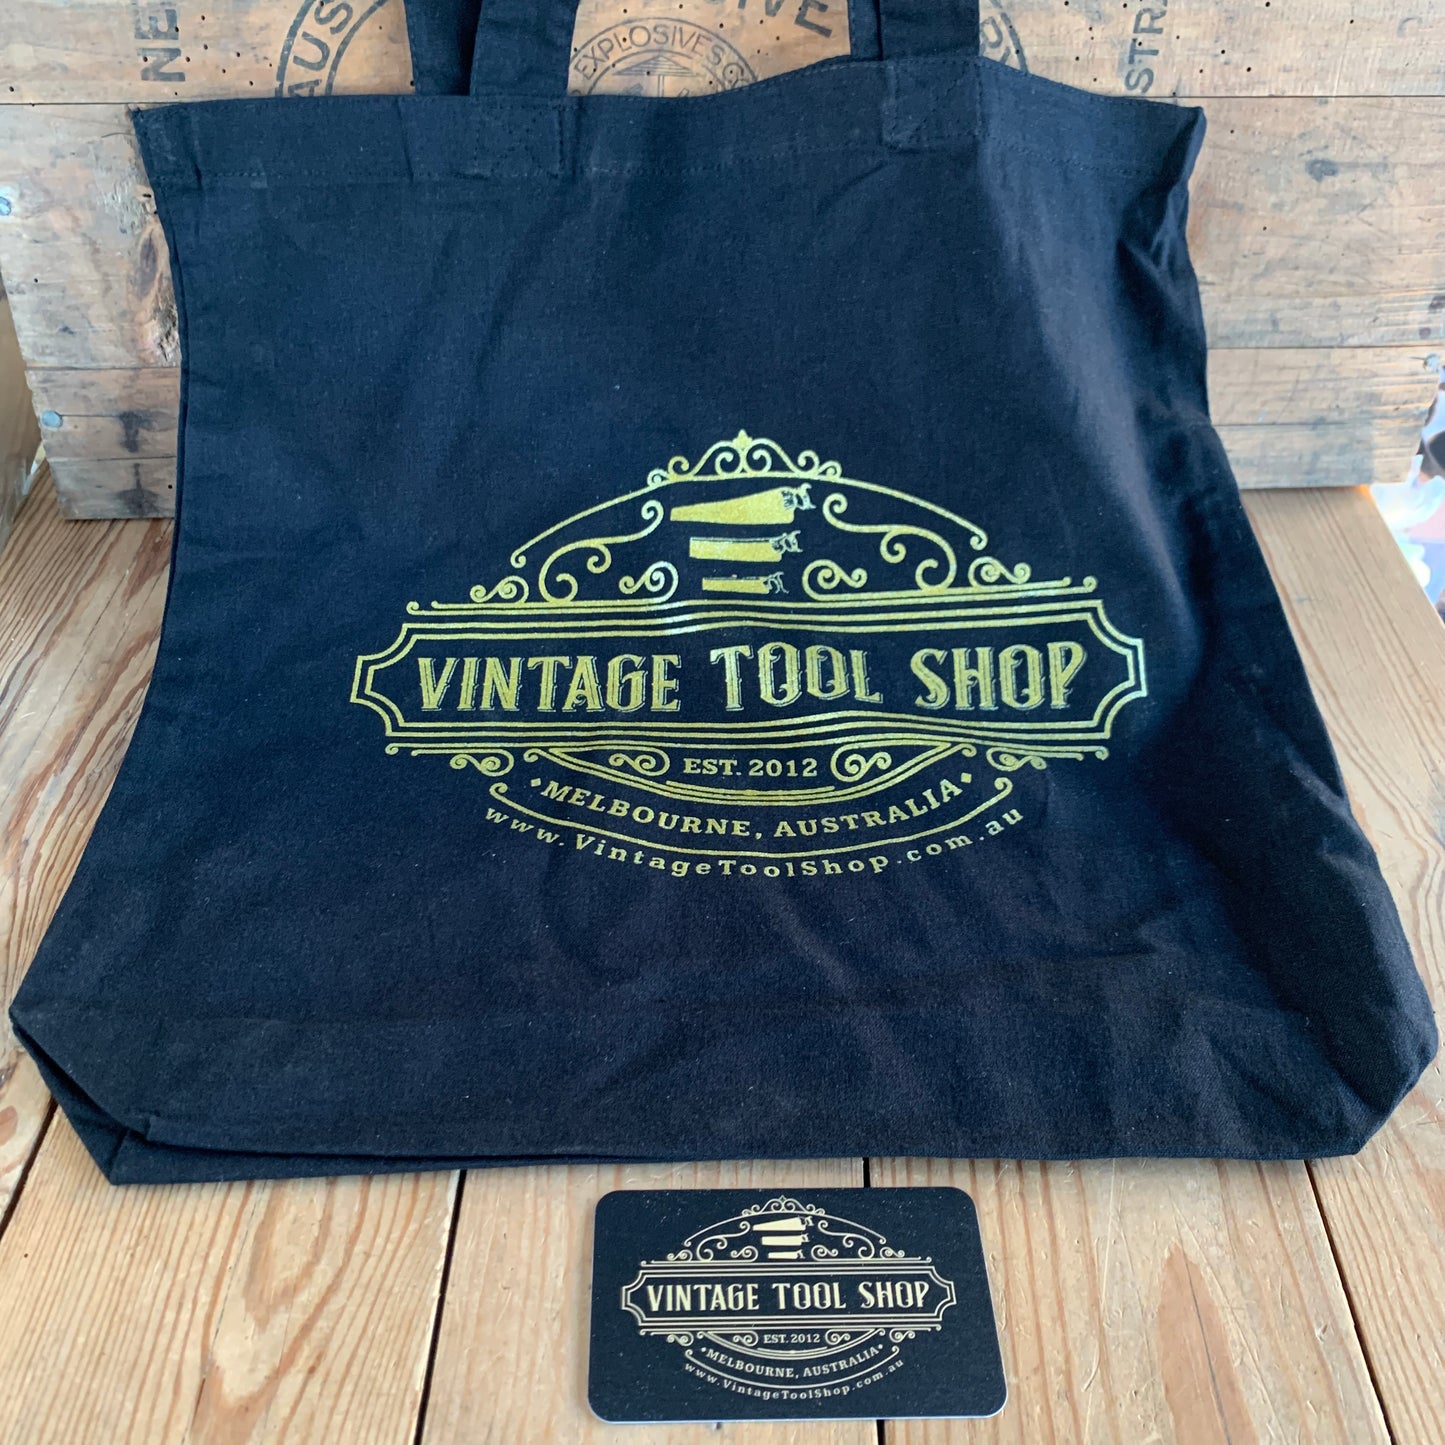 NEW! Vintage Tool Shop’s TOTE BAGS Printed in Melbourne 100% cotton